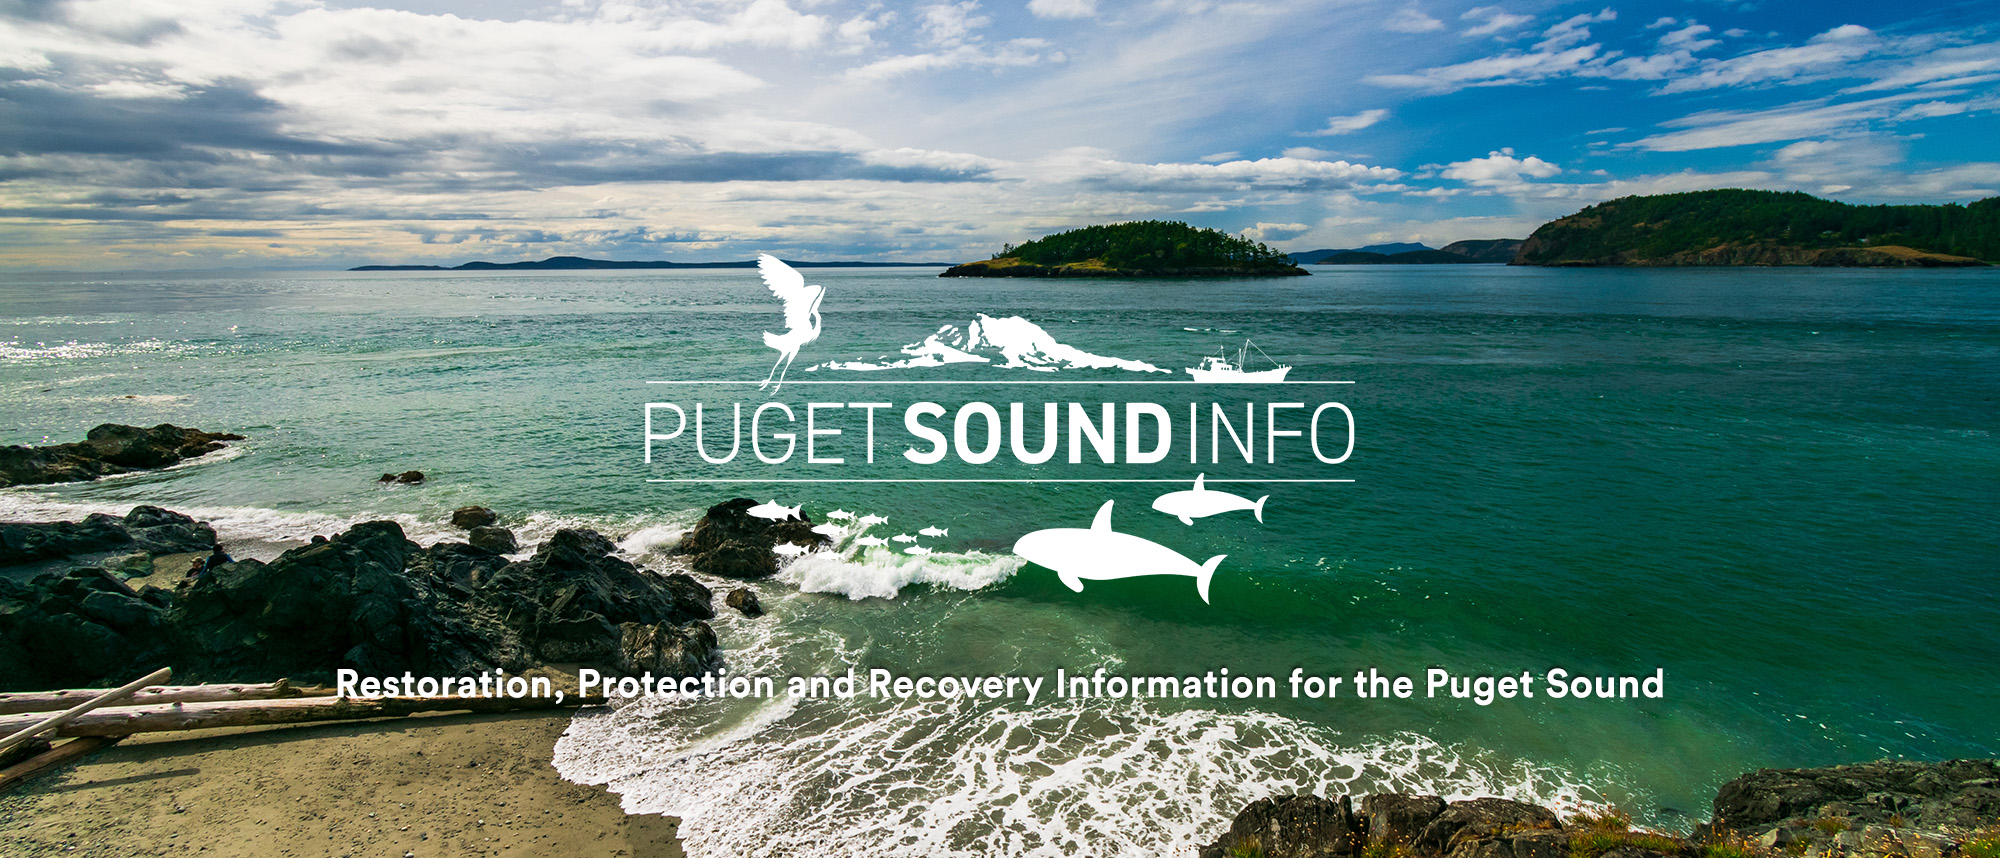 Puget Sound Info title image: Puget Sound, sky, and mountains. Restoration, Protection and Recovery Information for the Puget Sound